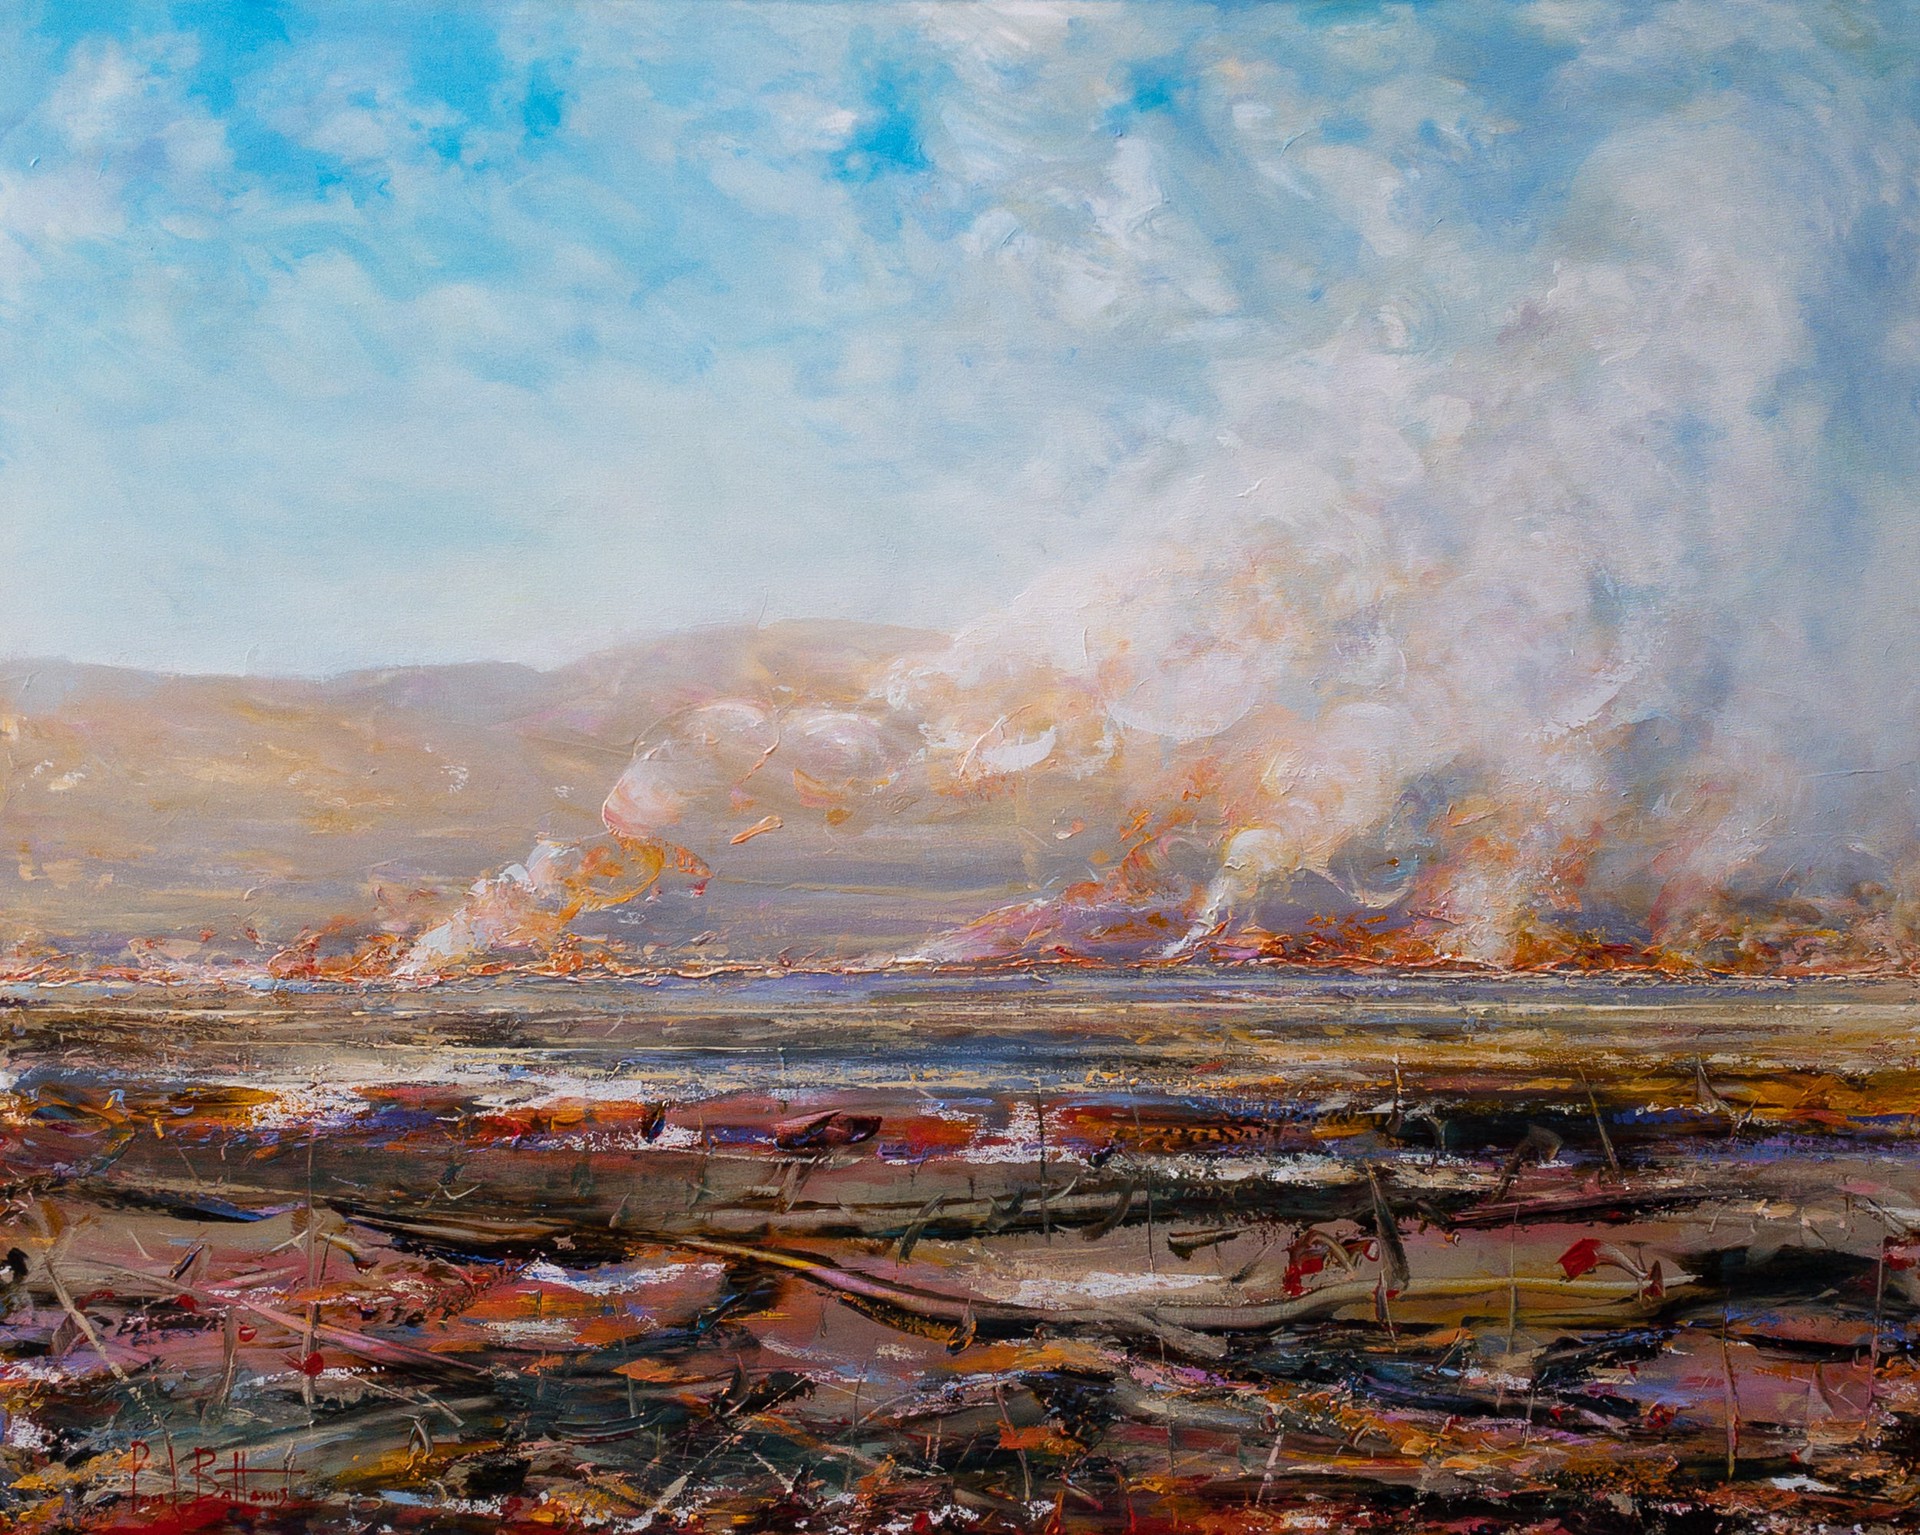 Clearing the Land by Paul Battams